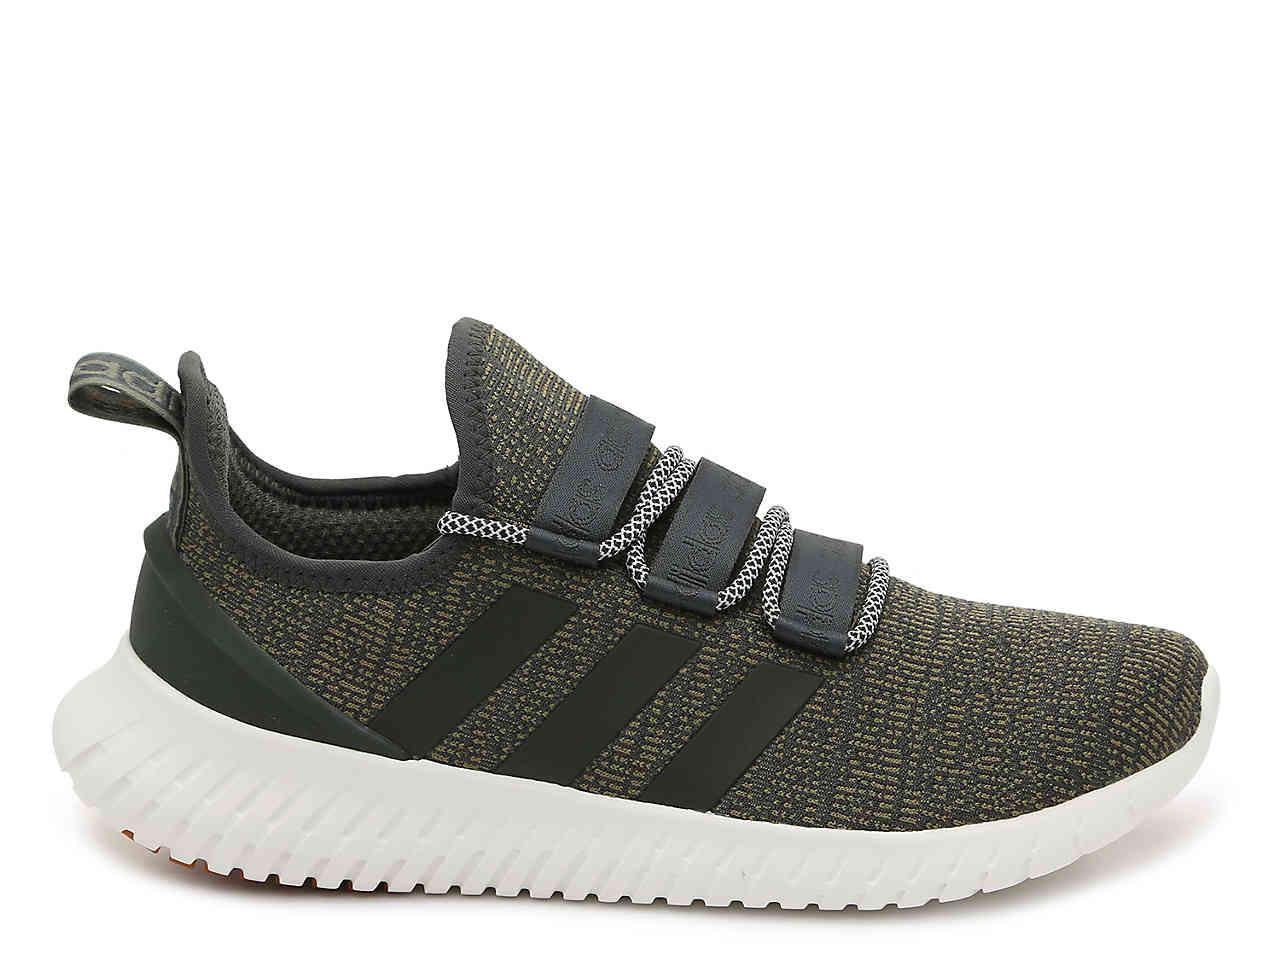 adidas olive green tennis shoes